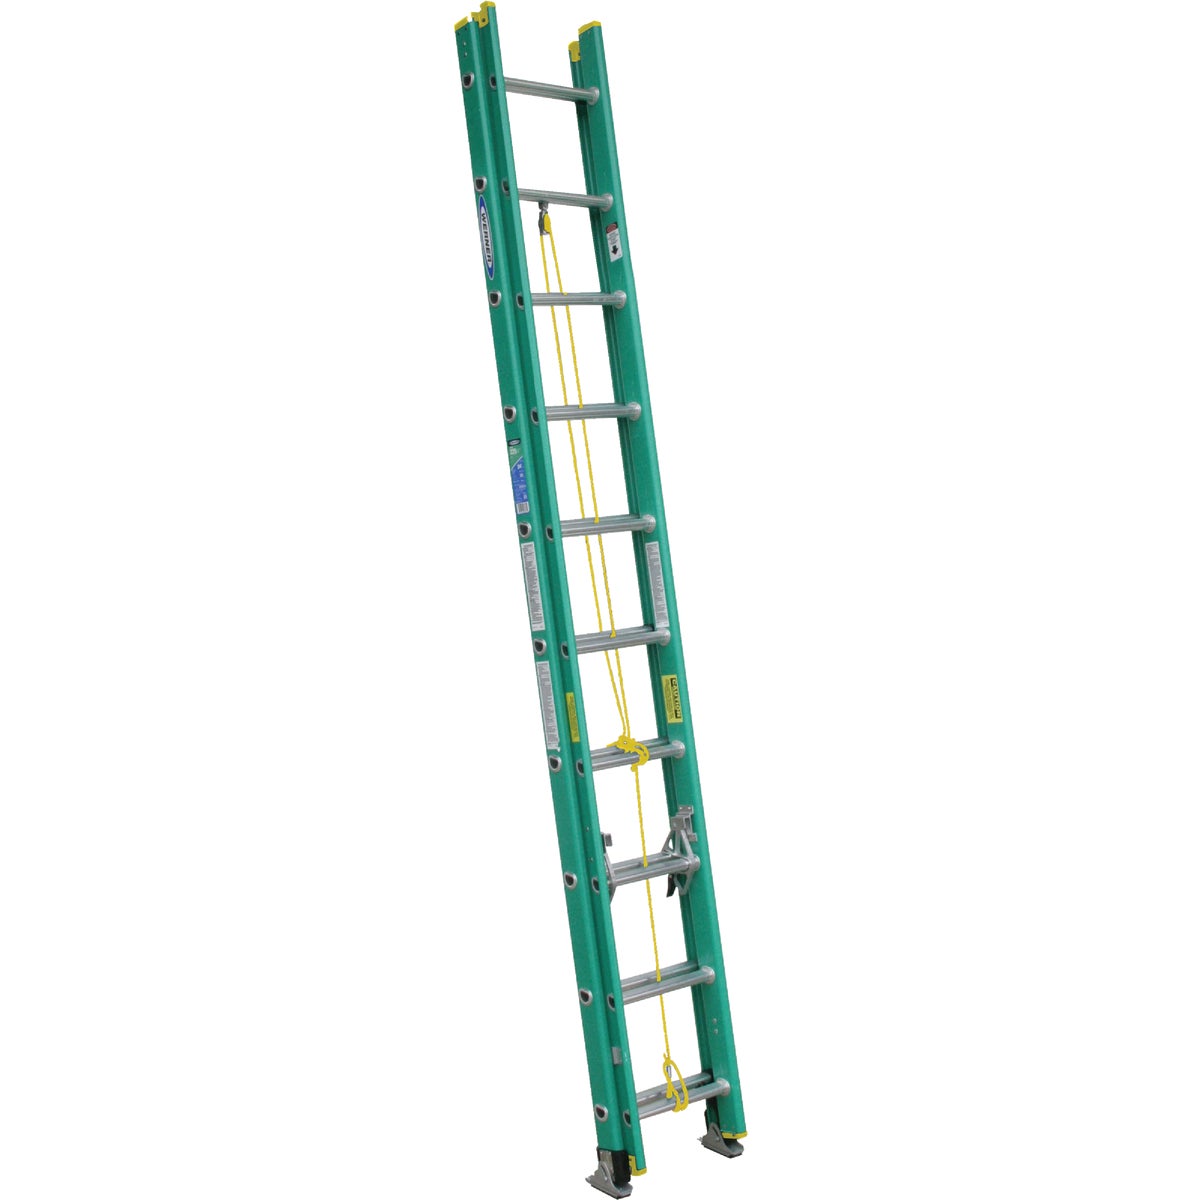 Werner 20 Ft. Fiberglass Extension Ladder with 225 Lb. Load Capacity Type II Duty Rating